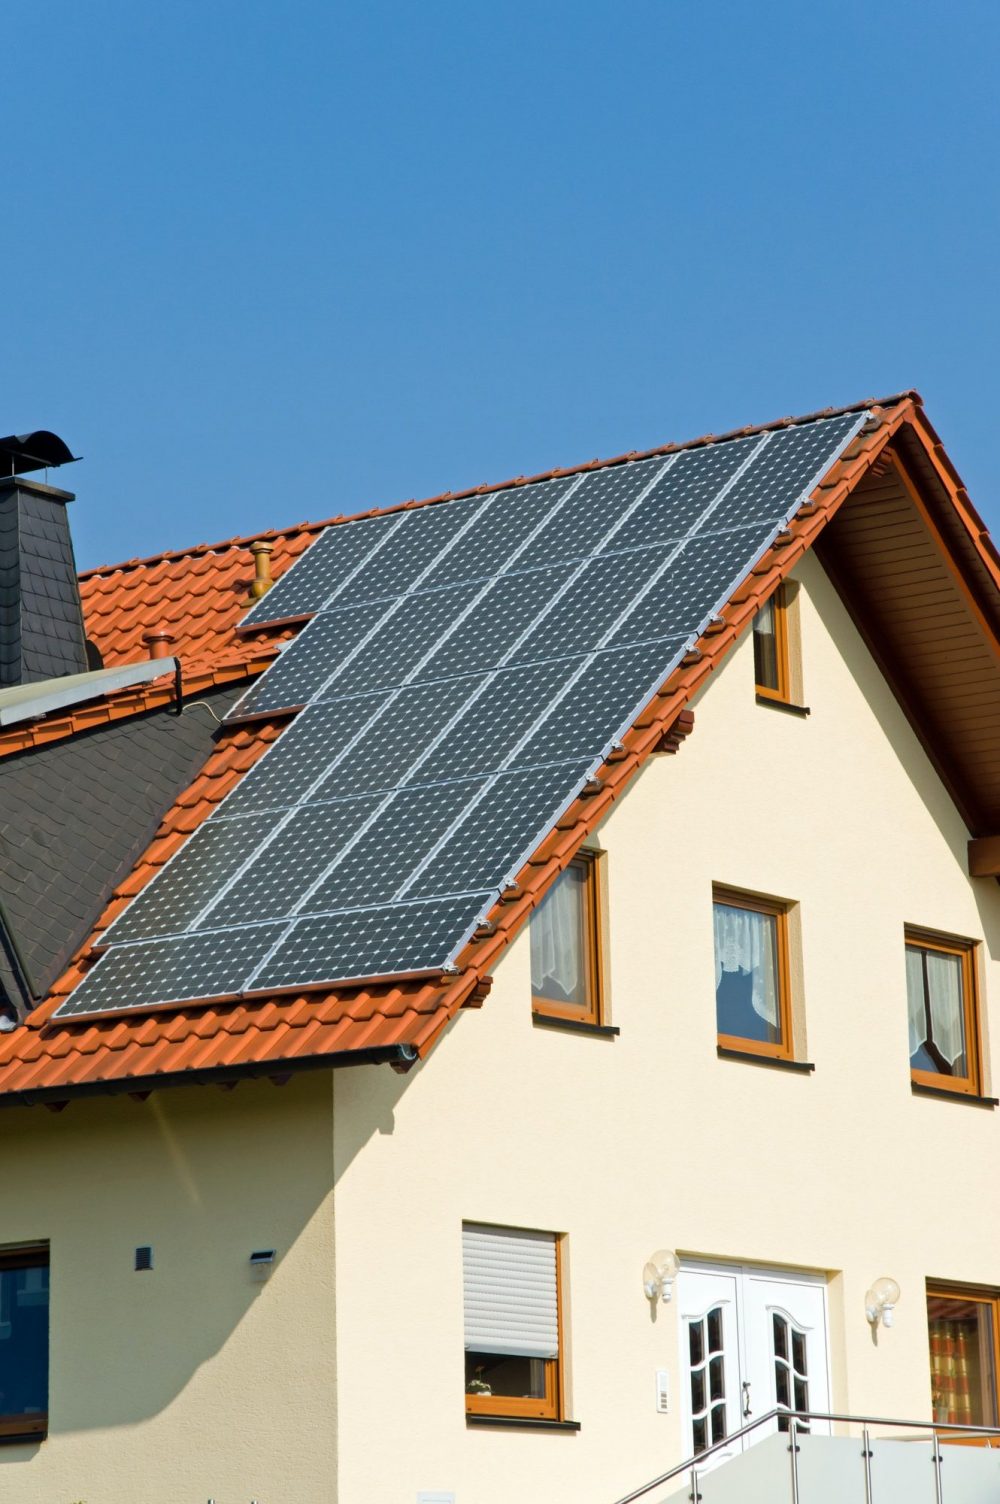 roof-with-solar-panels-in-germany-e1617069647324.jpg